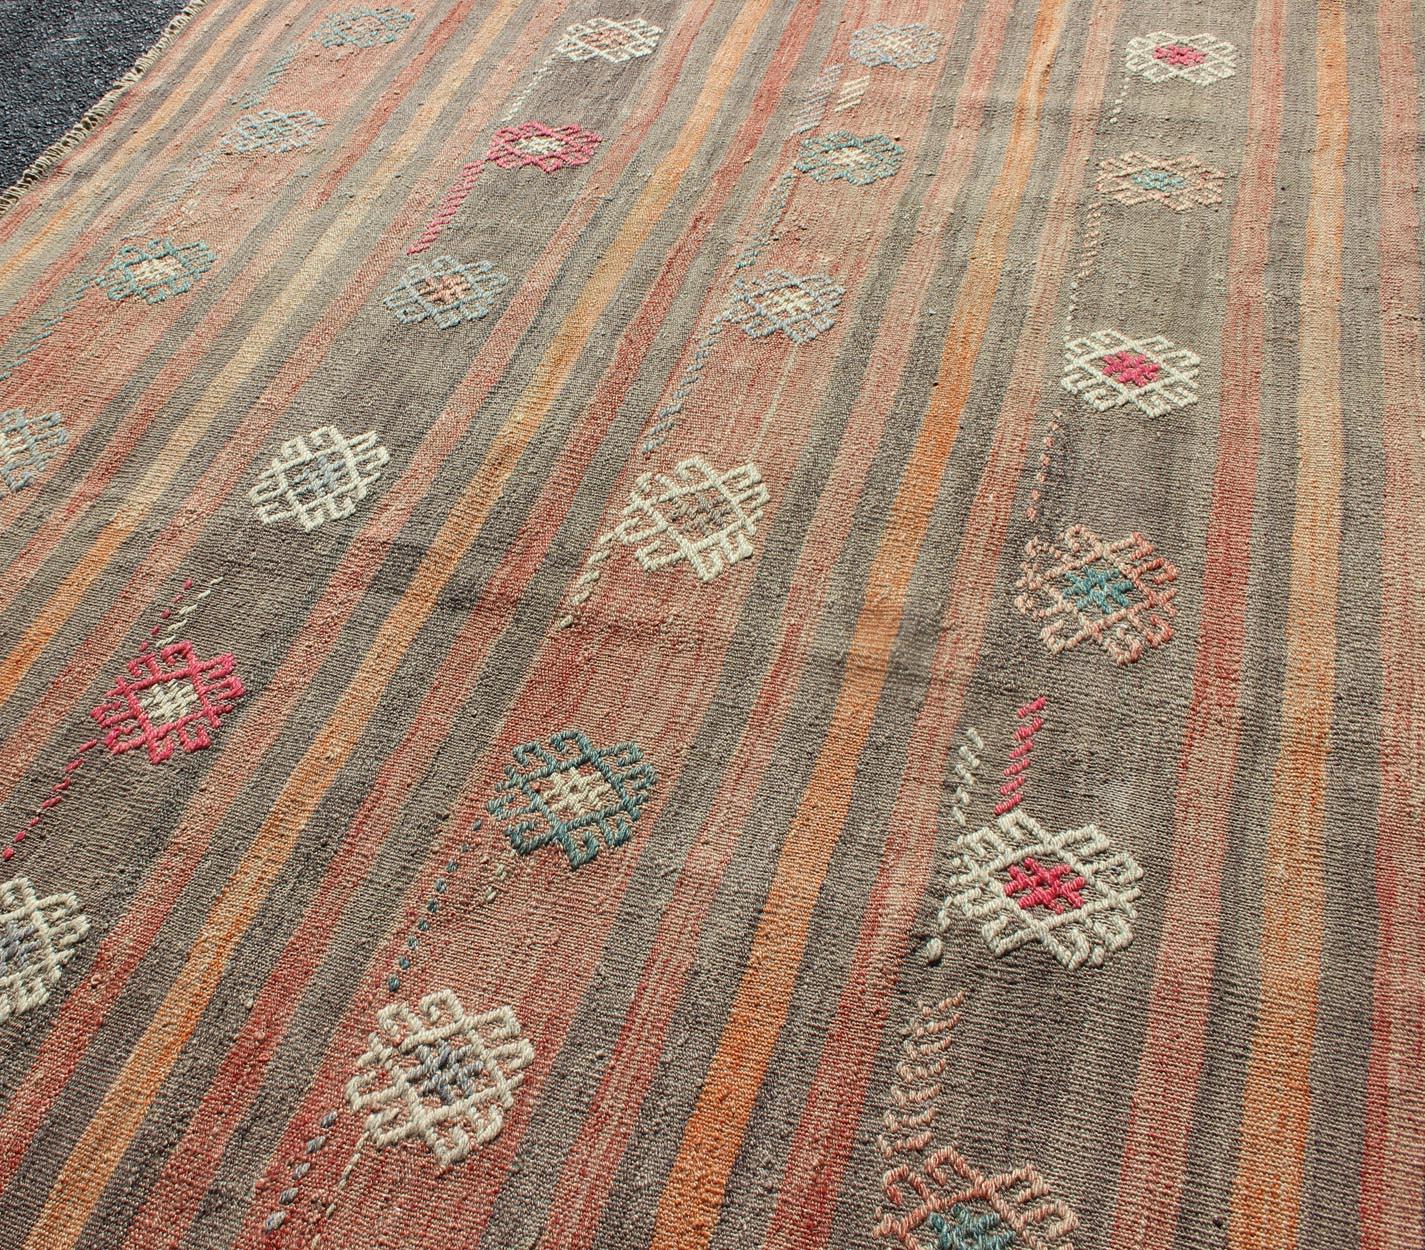 20th Century Colorful Vintage Turkish Flat-Weave Kilim Rug with Striped Geometric Design For Sale